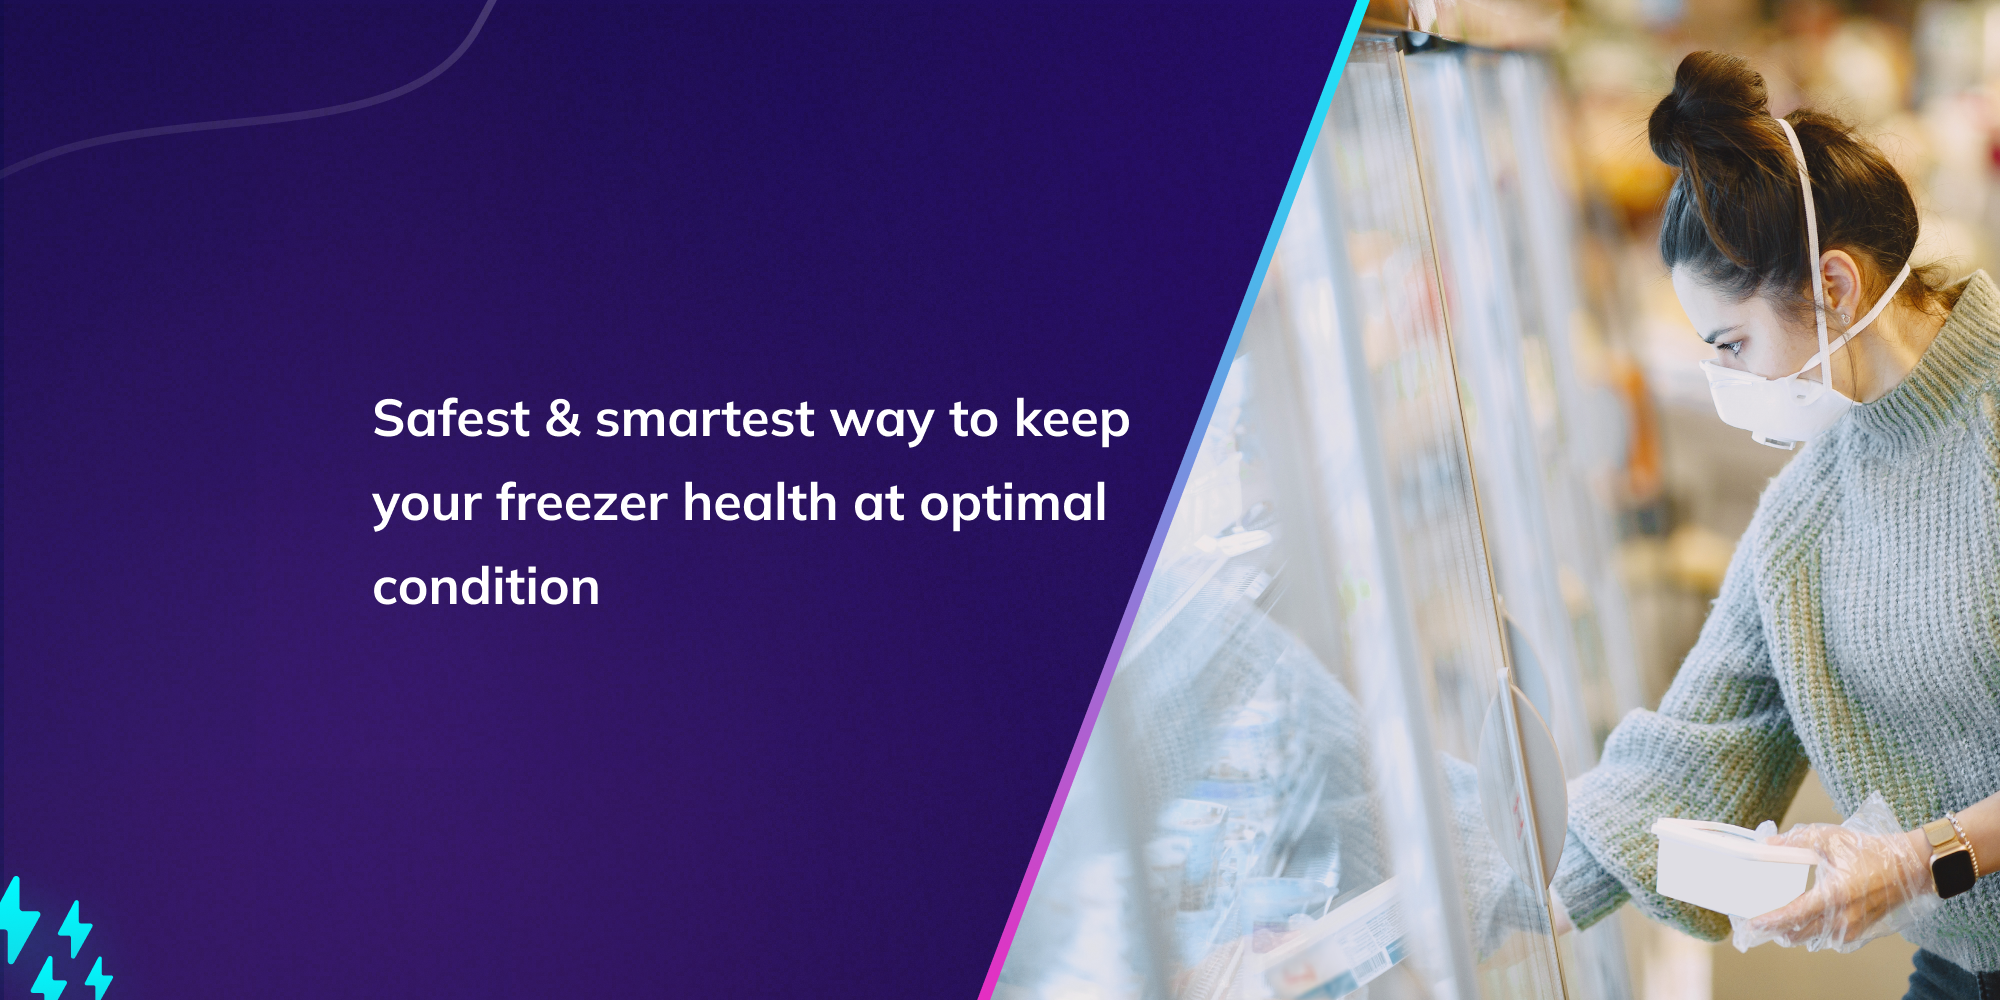 Safest & smartest way to keep your freezer health at optimal condition